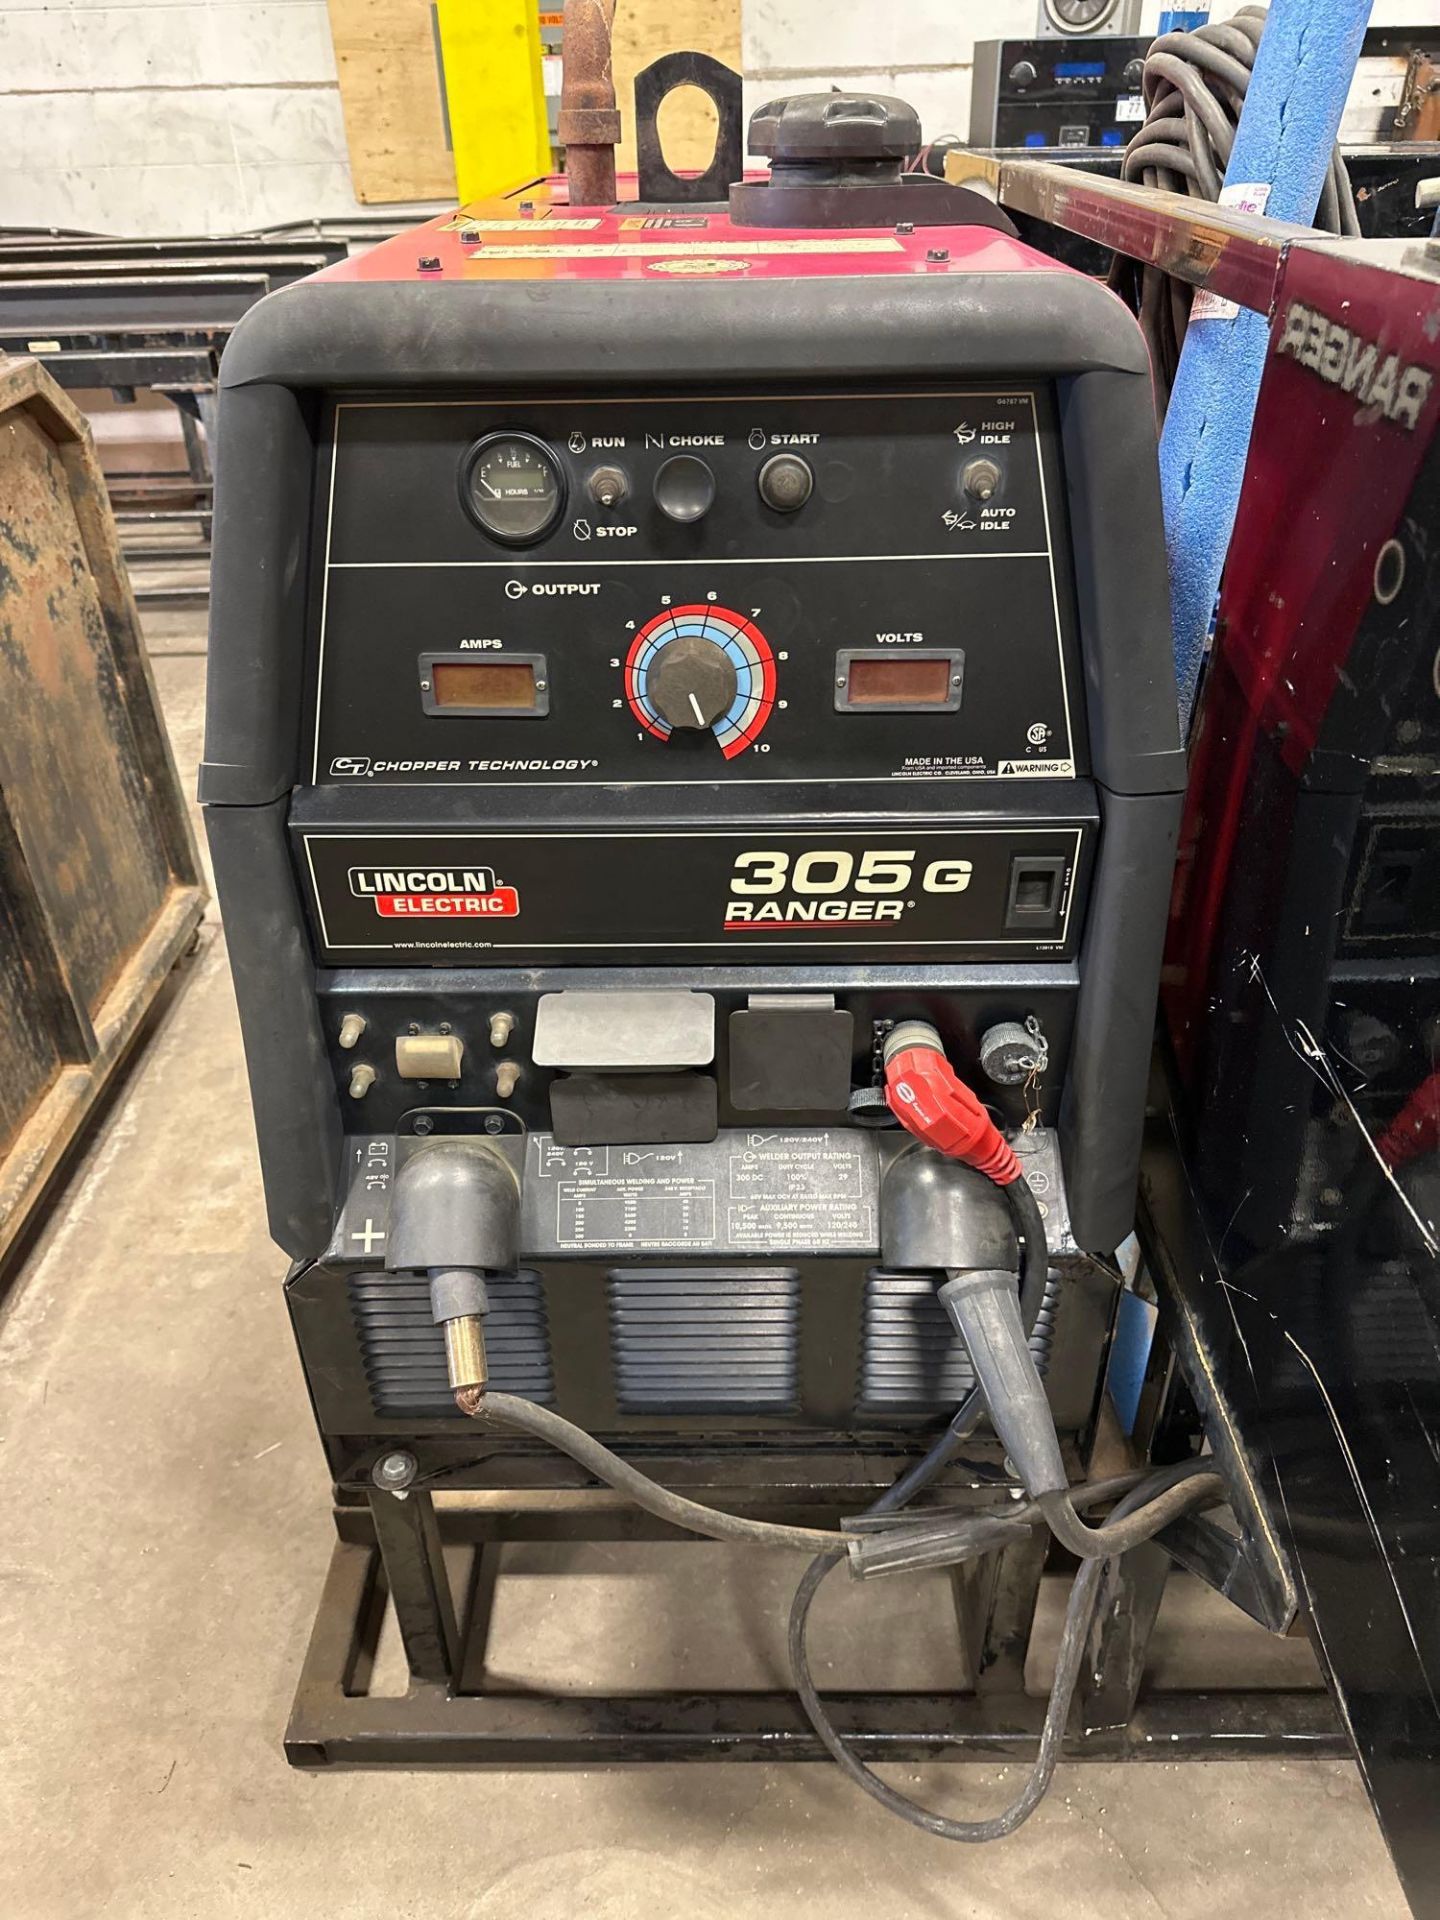 Lincoln Electric 305G Ranger Gas Welder w. Welding Skid incl. Tool Cabinets, Hose Reels, Hoses - Image 8 of 9